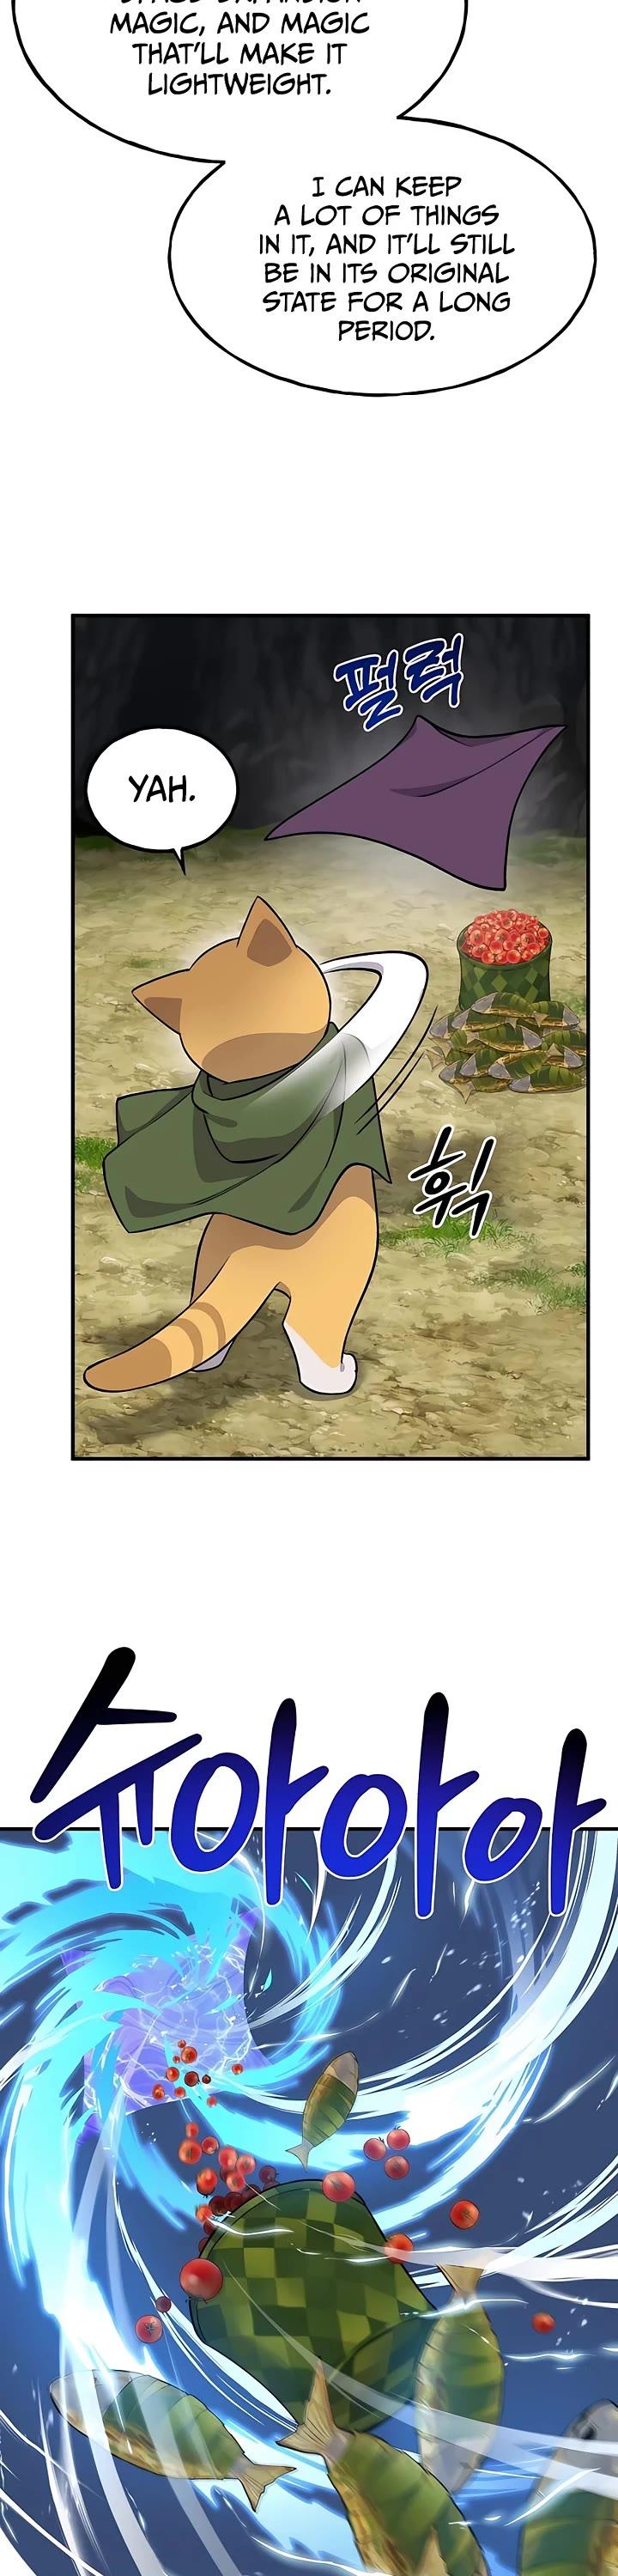 Solo Farming In The Tower, Chapter 12 Solo Farming In The Tower Manga